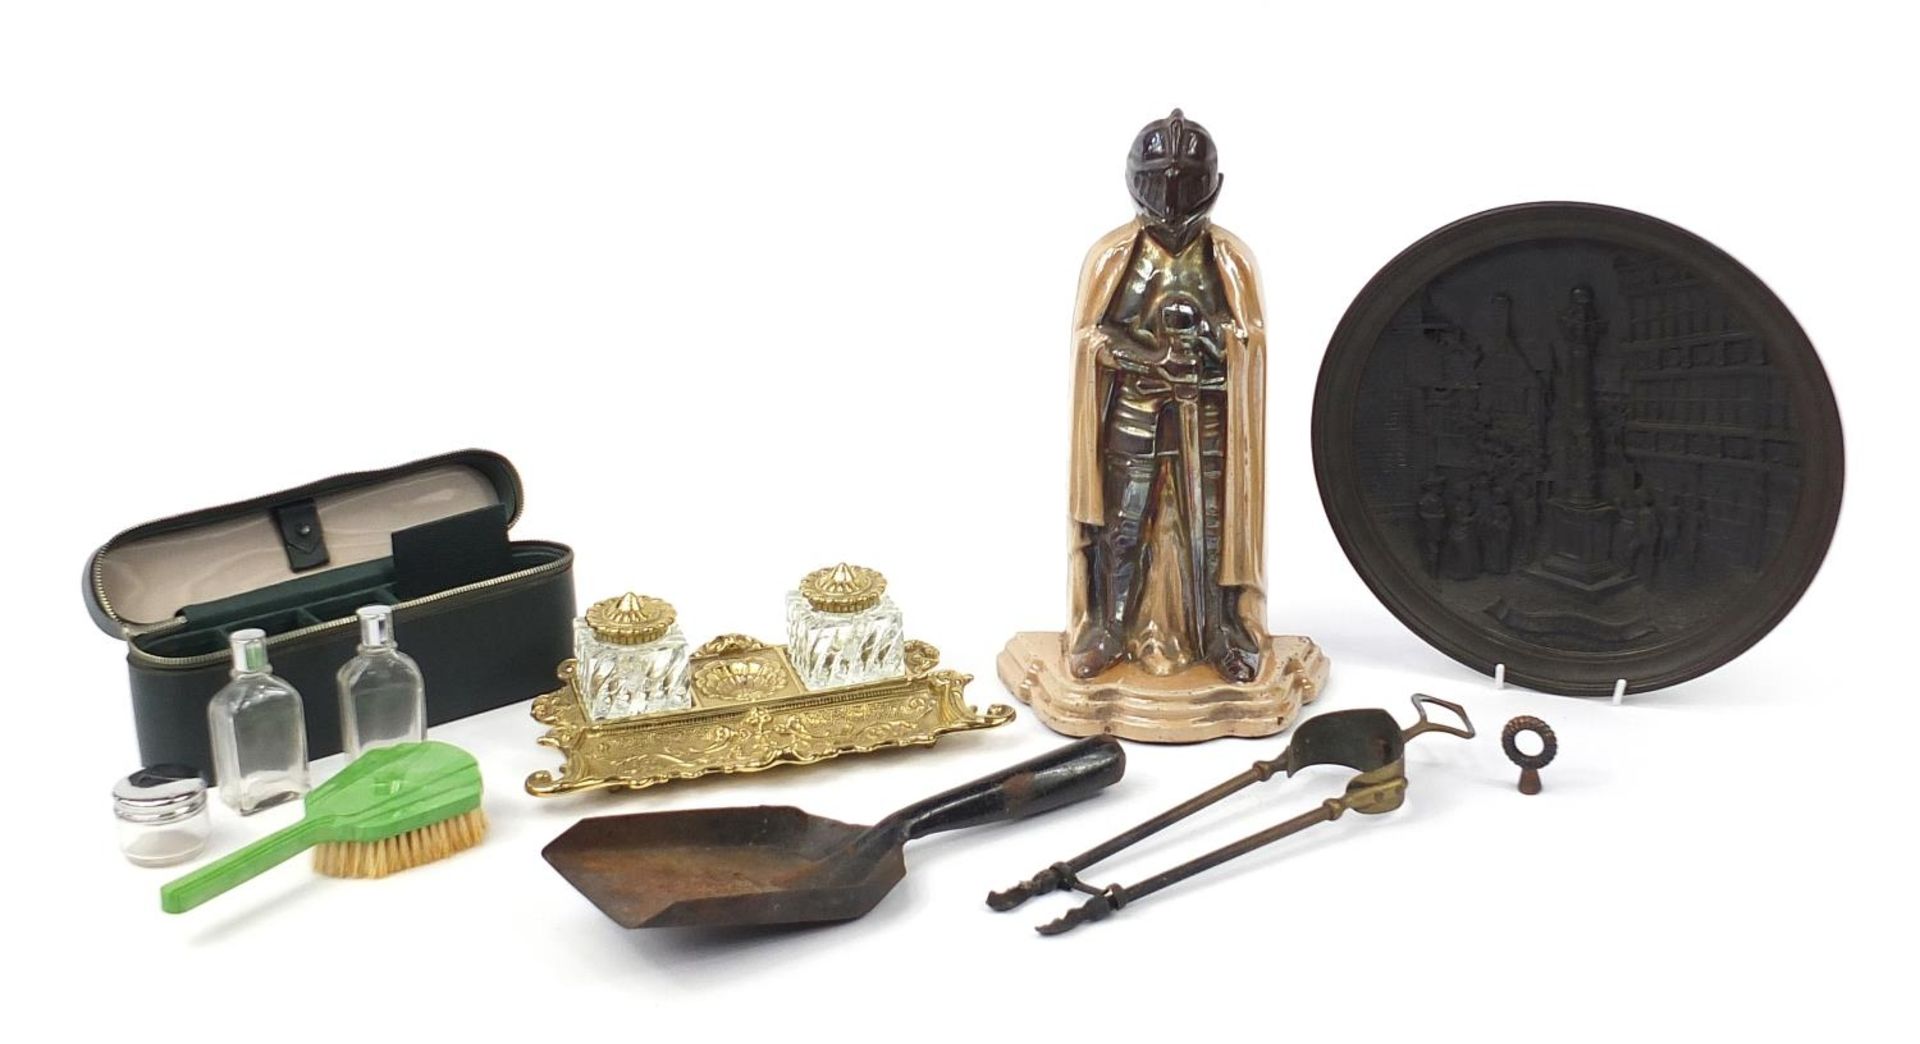 Sundry items including an ornate brass desk stand with glass inkwells and a knight fire companion